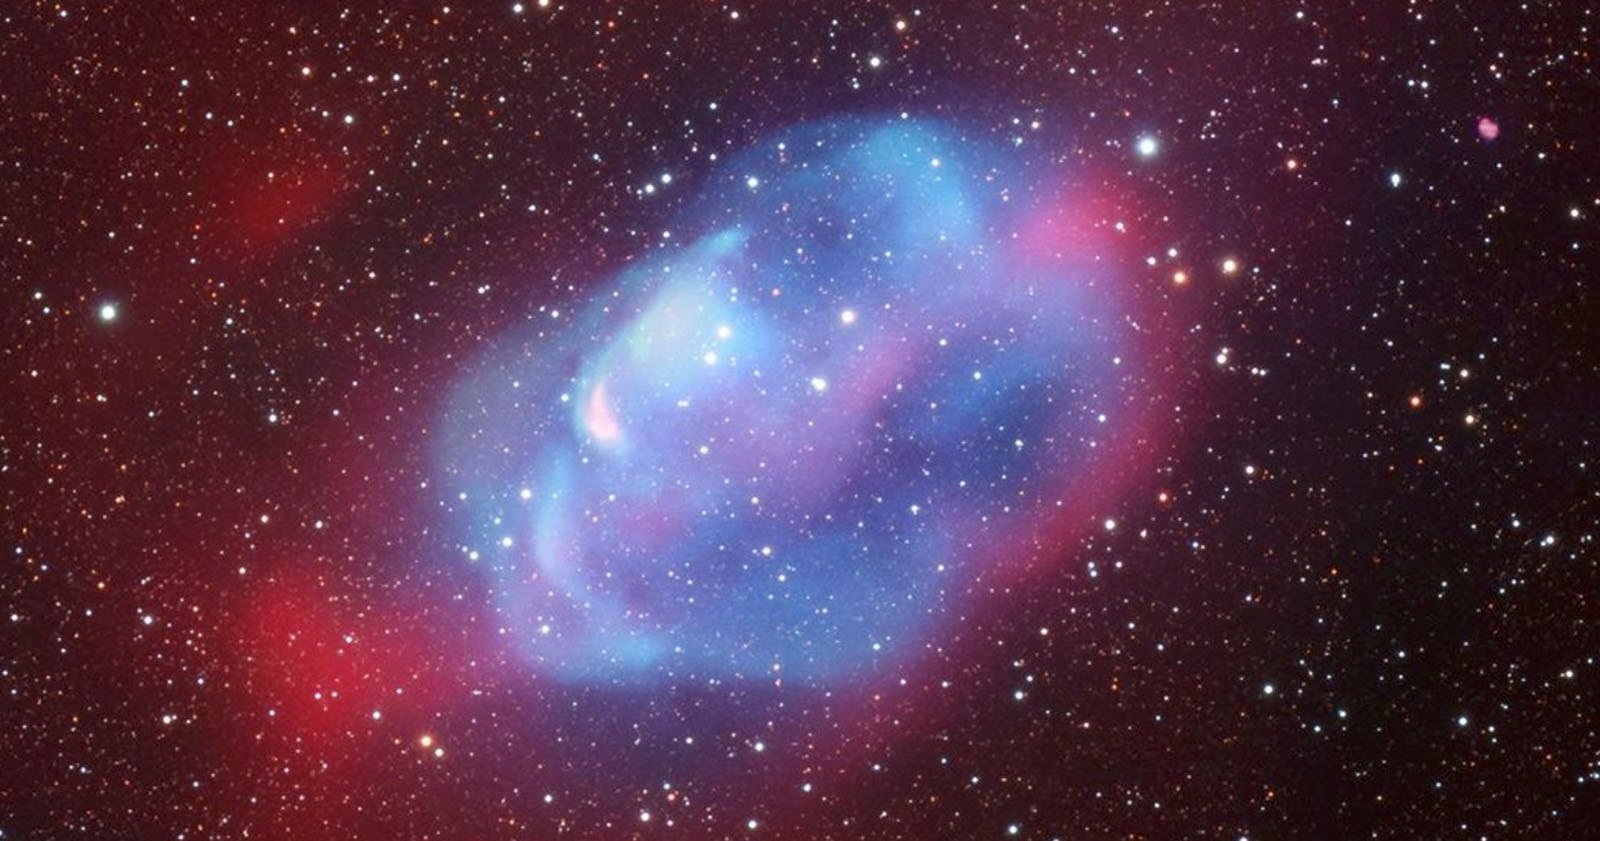 How Two Astrophotographers Discovered a New Nebula